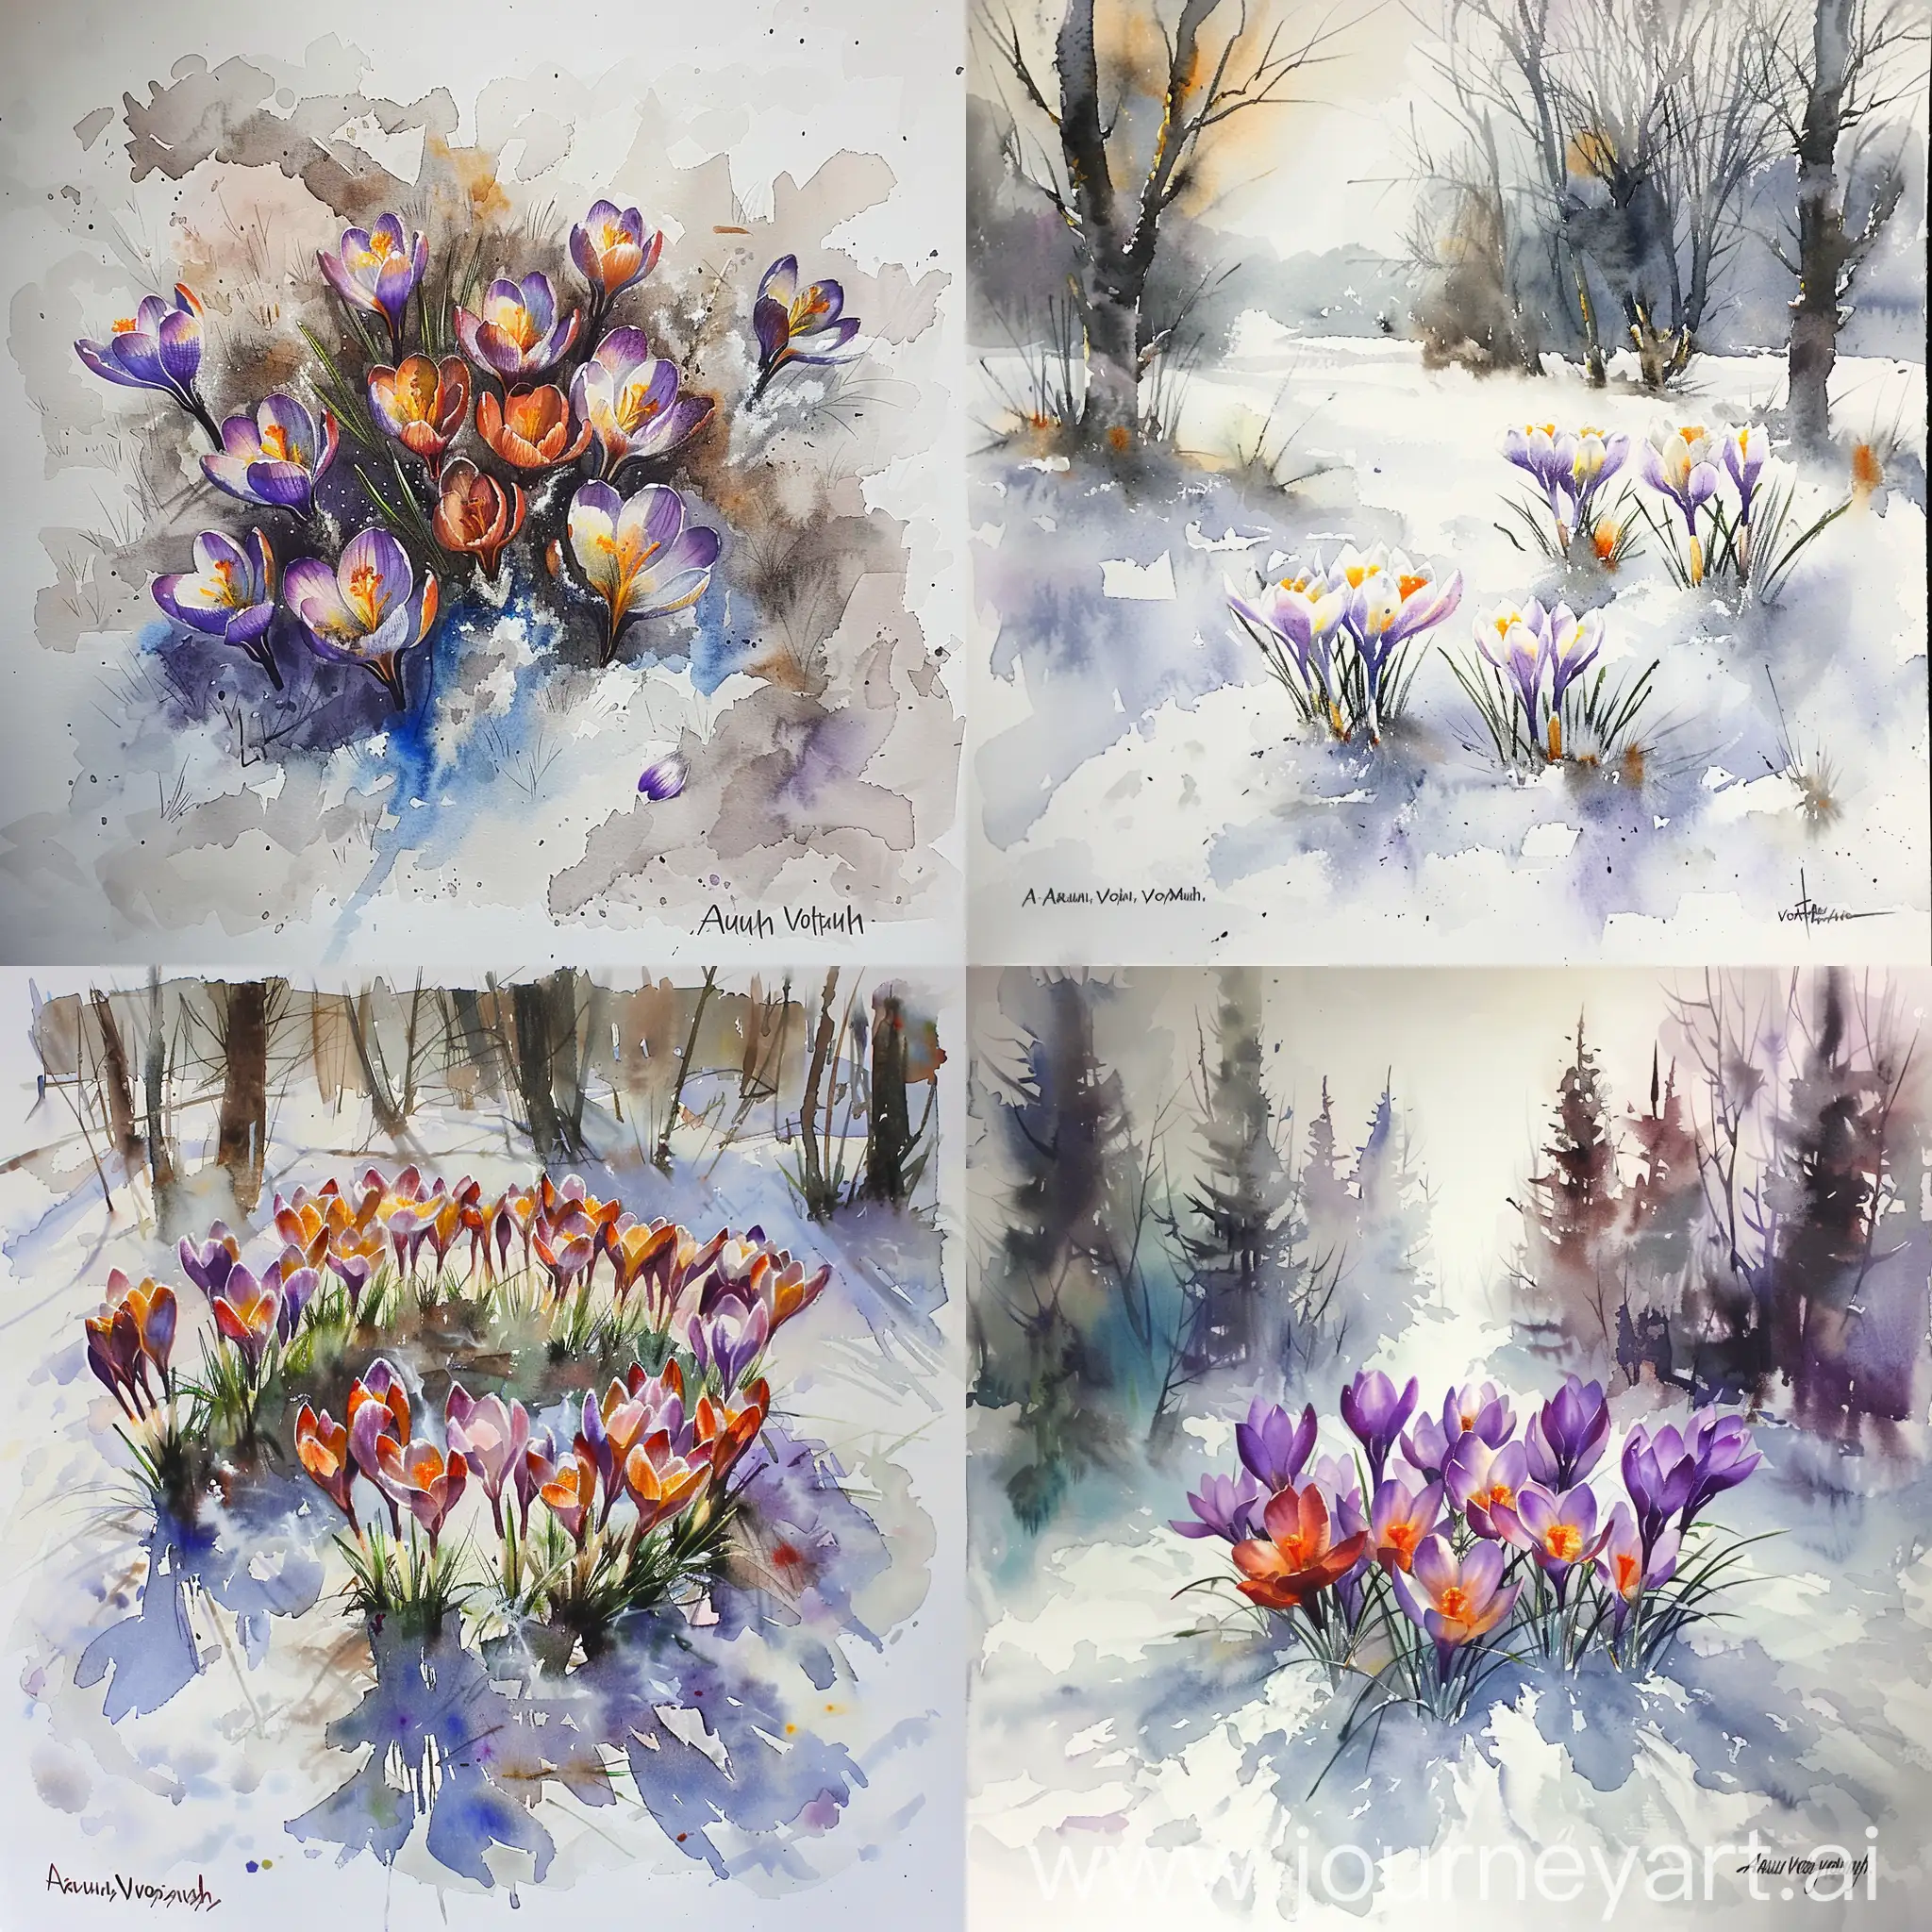 Vibrant-Crocuses-in-Snow-Arush-Votsmushs-Lively-Watercolor-Masterpiece